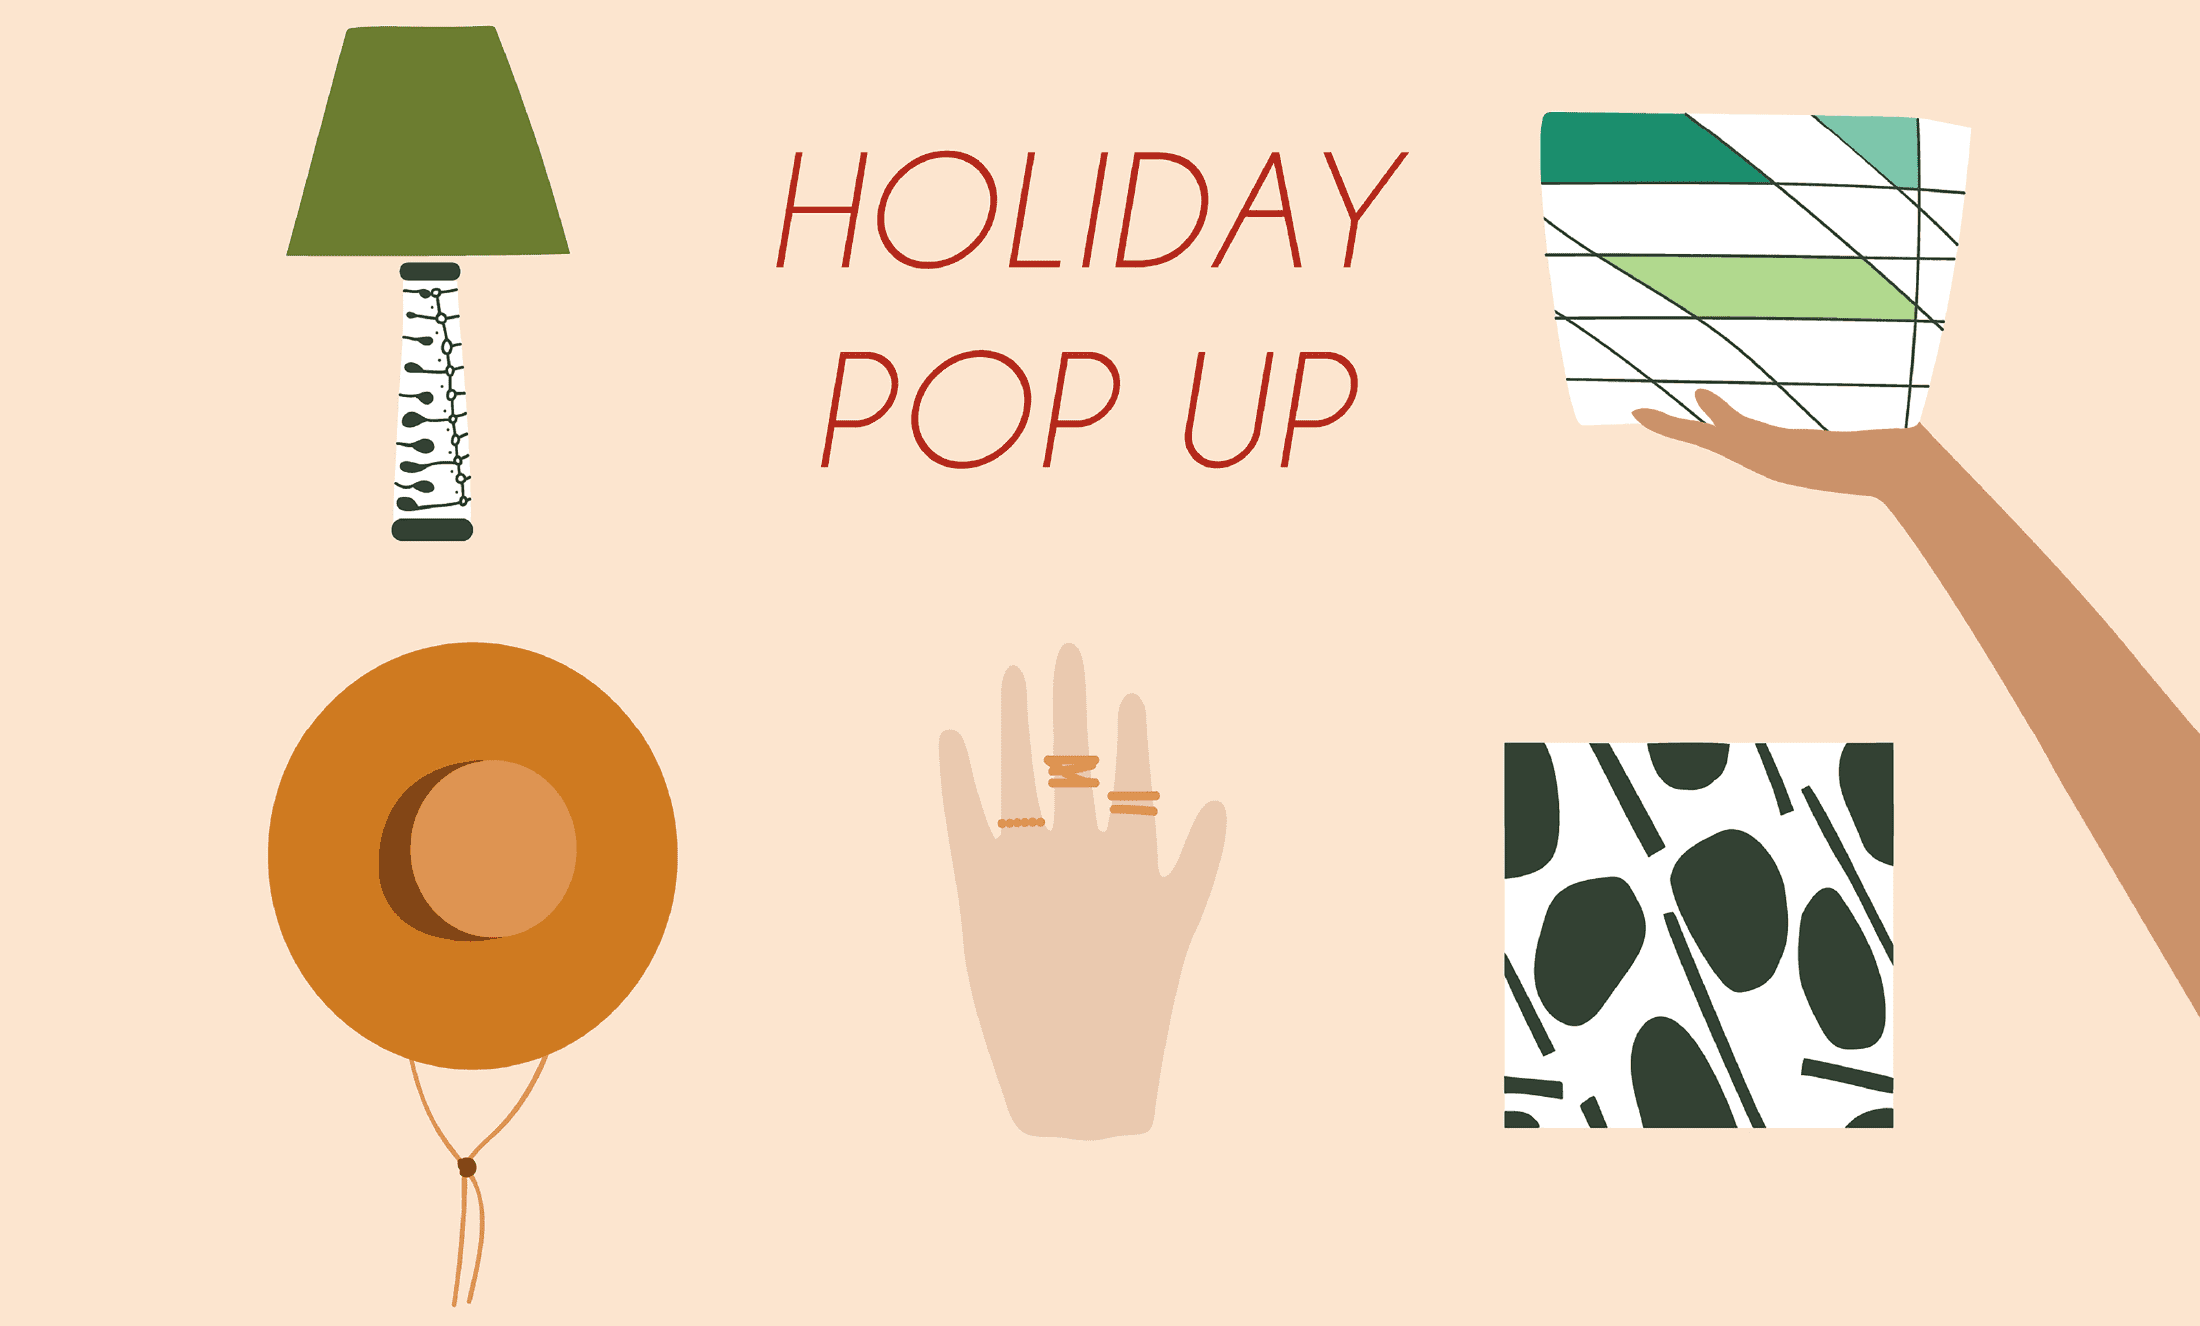 Holiday Pop Up Event Coming Up on December 18, 2018